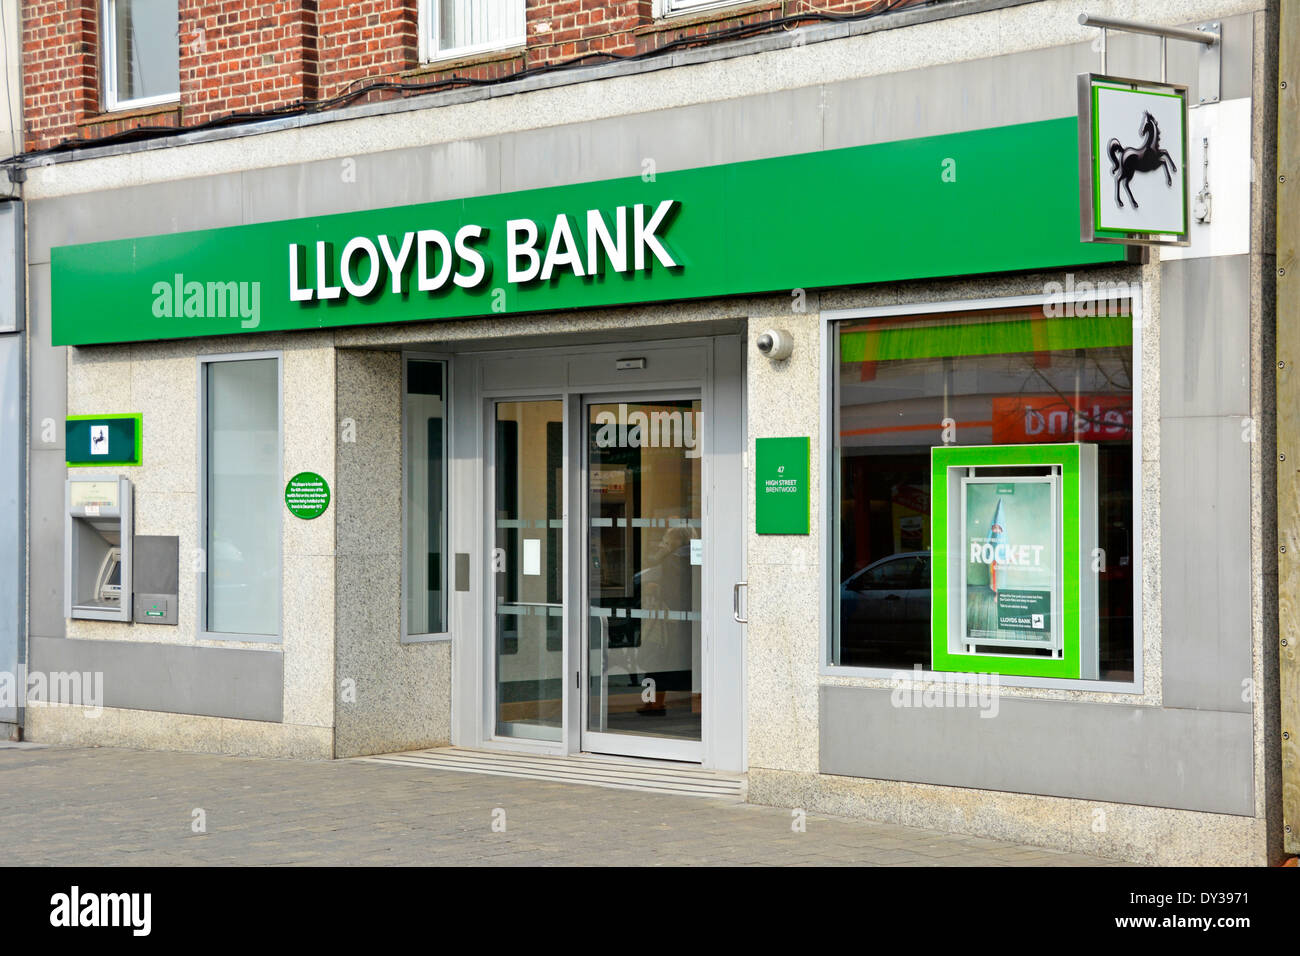 New Lloyds bank shop front styling after split up of Lloyds TSB Brentwood shopping High Street premises Essex England UK Stock Photo